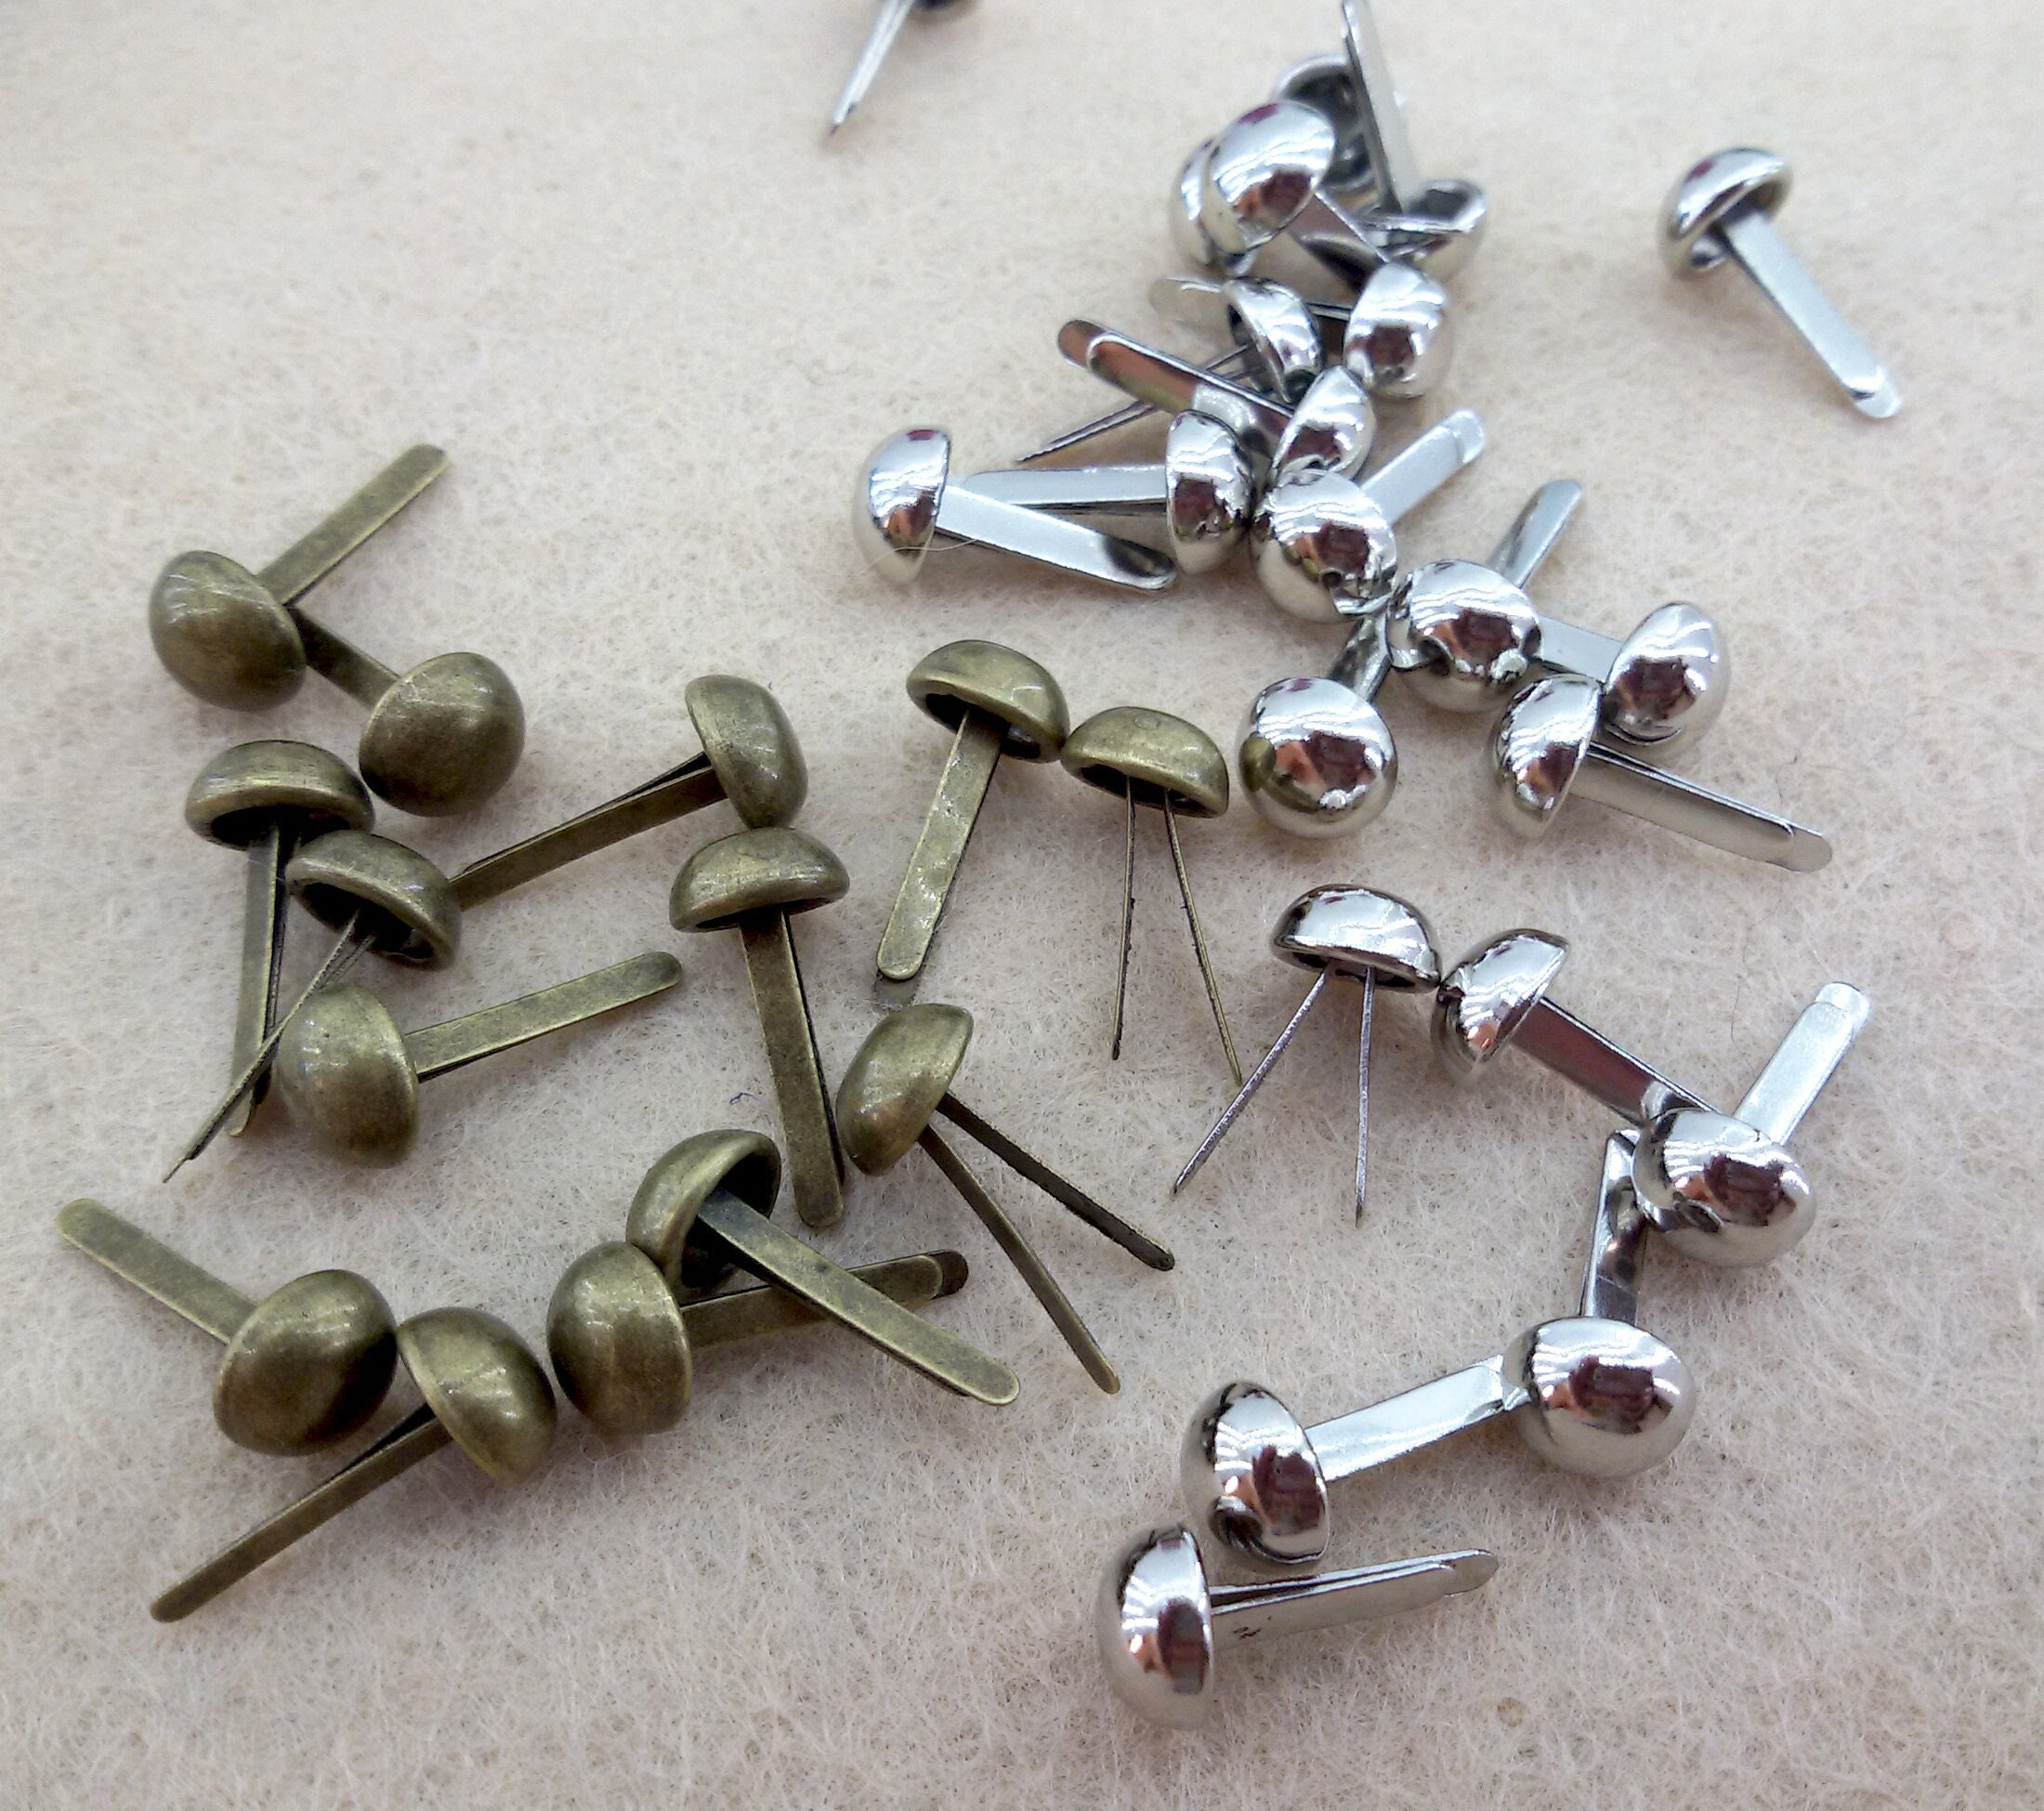 Trimming Shop 500pcs Metal Split Paper Fastener Pins, Round Head Split Pins  Brads with Storage Box for Scrapbooking, Crafting, Toy Making, Document